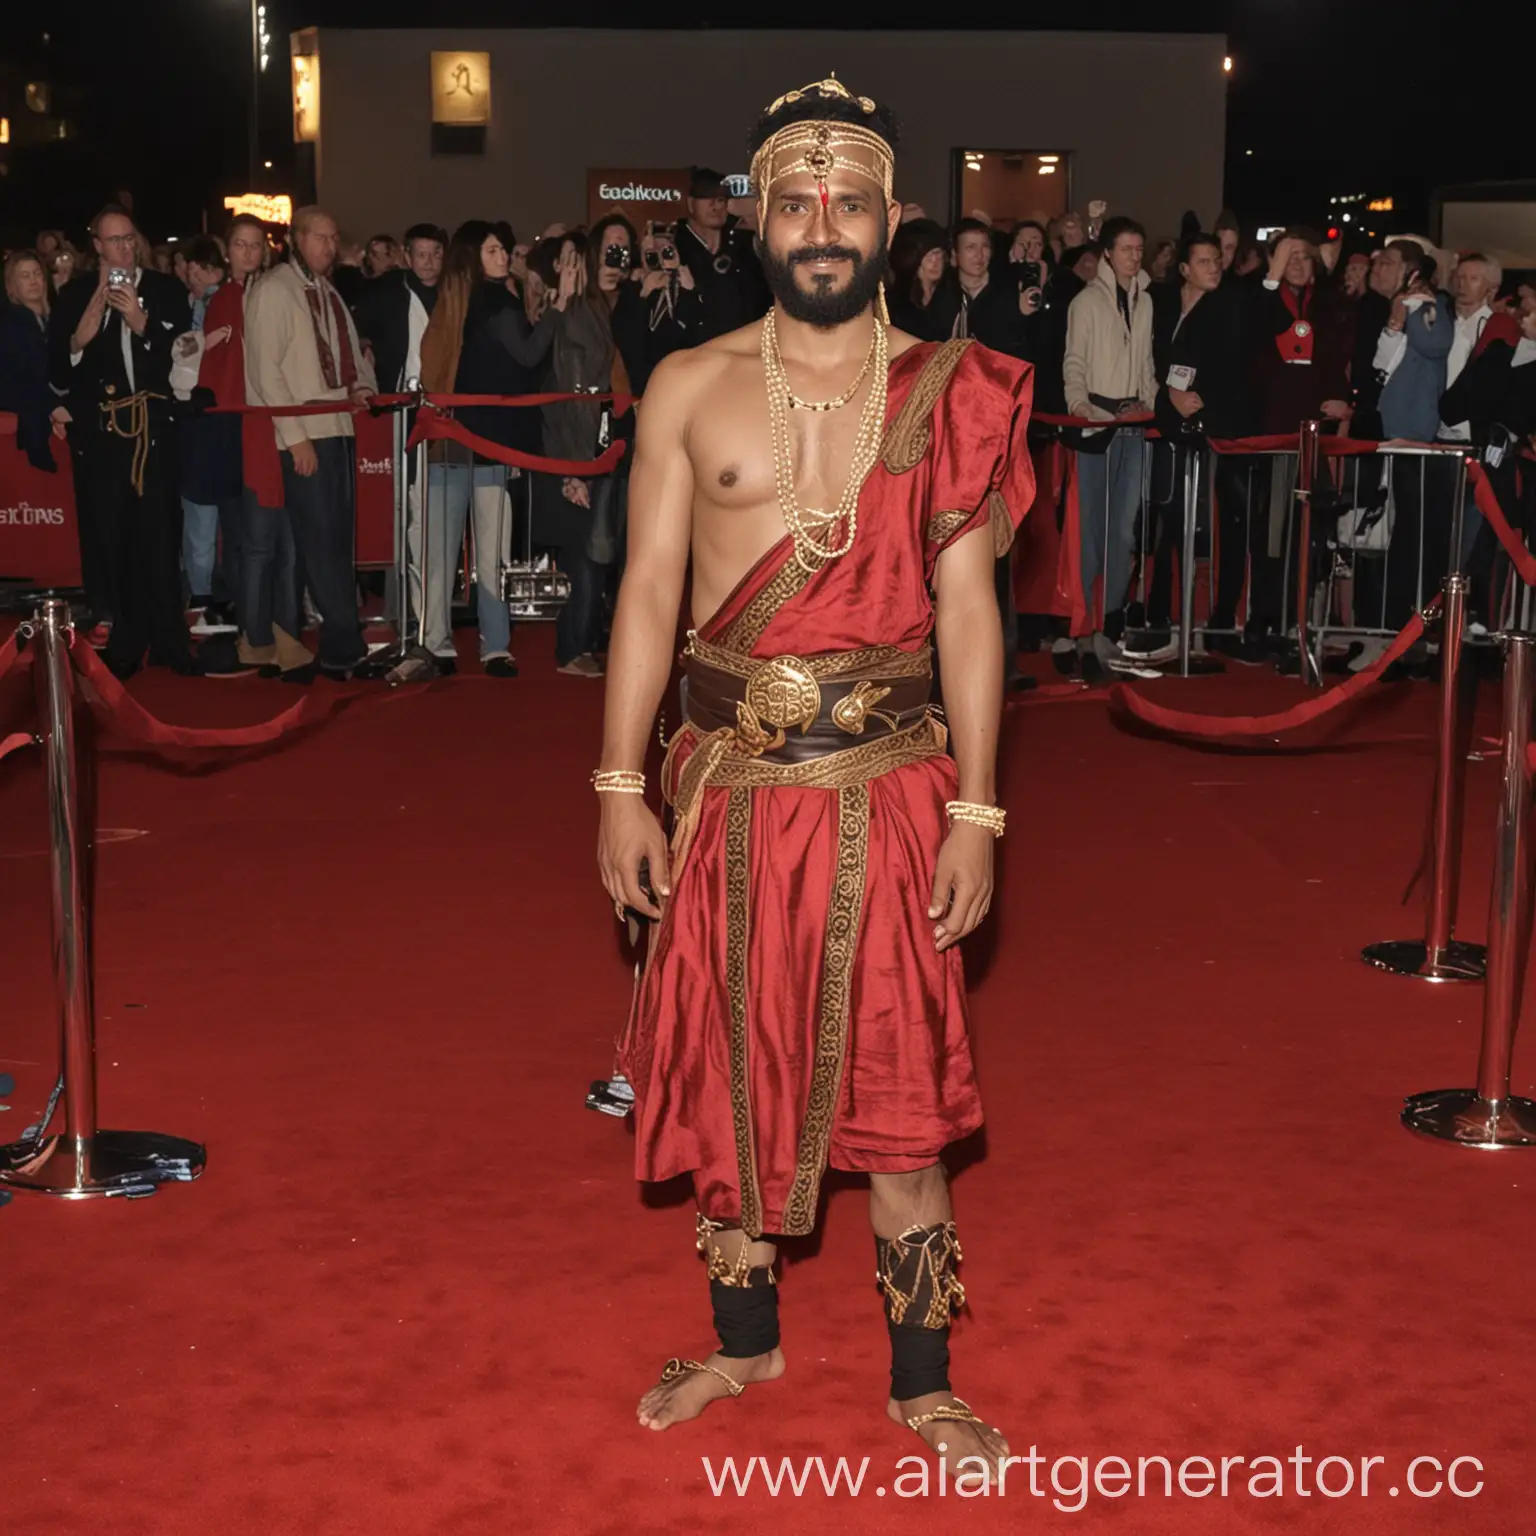 Celebrity-in-Exotic-Bird-Costume-Makes-Grand-Entrance-on-Red-Carpet